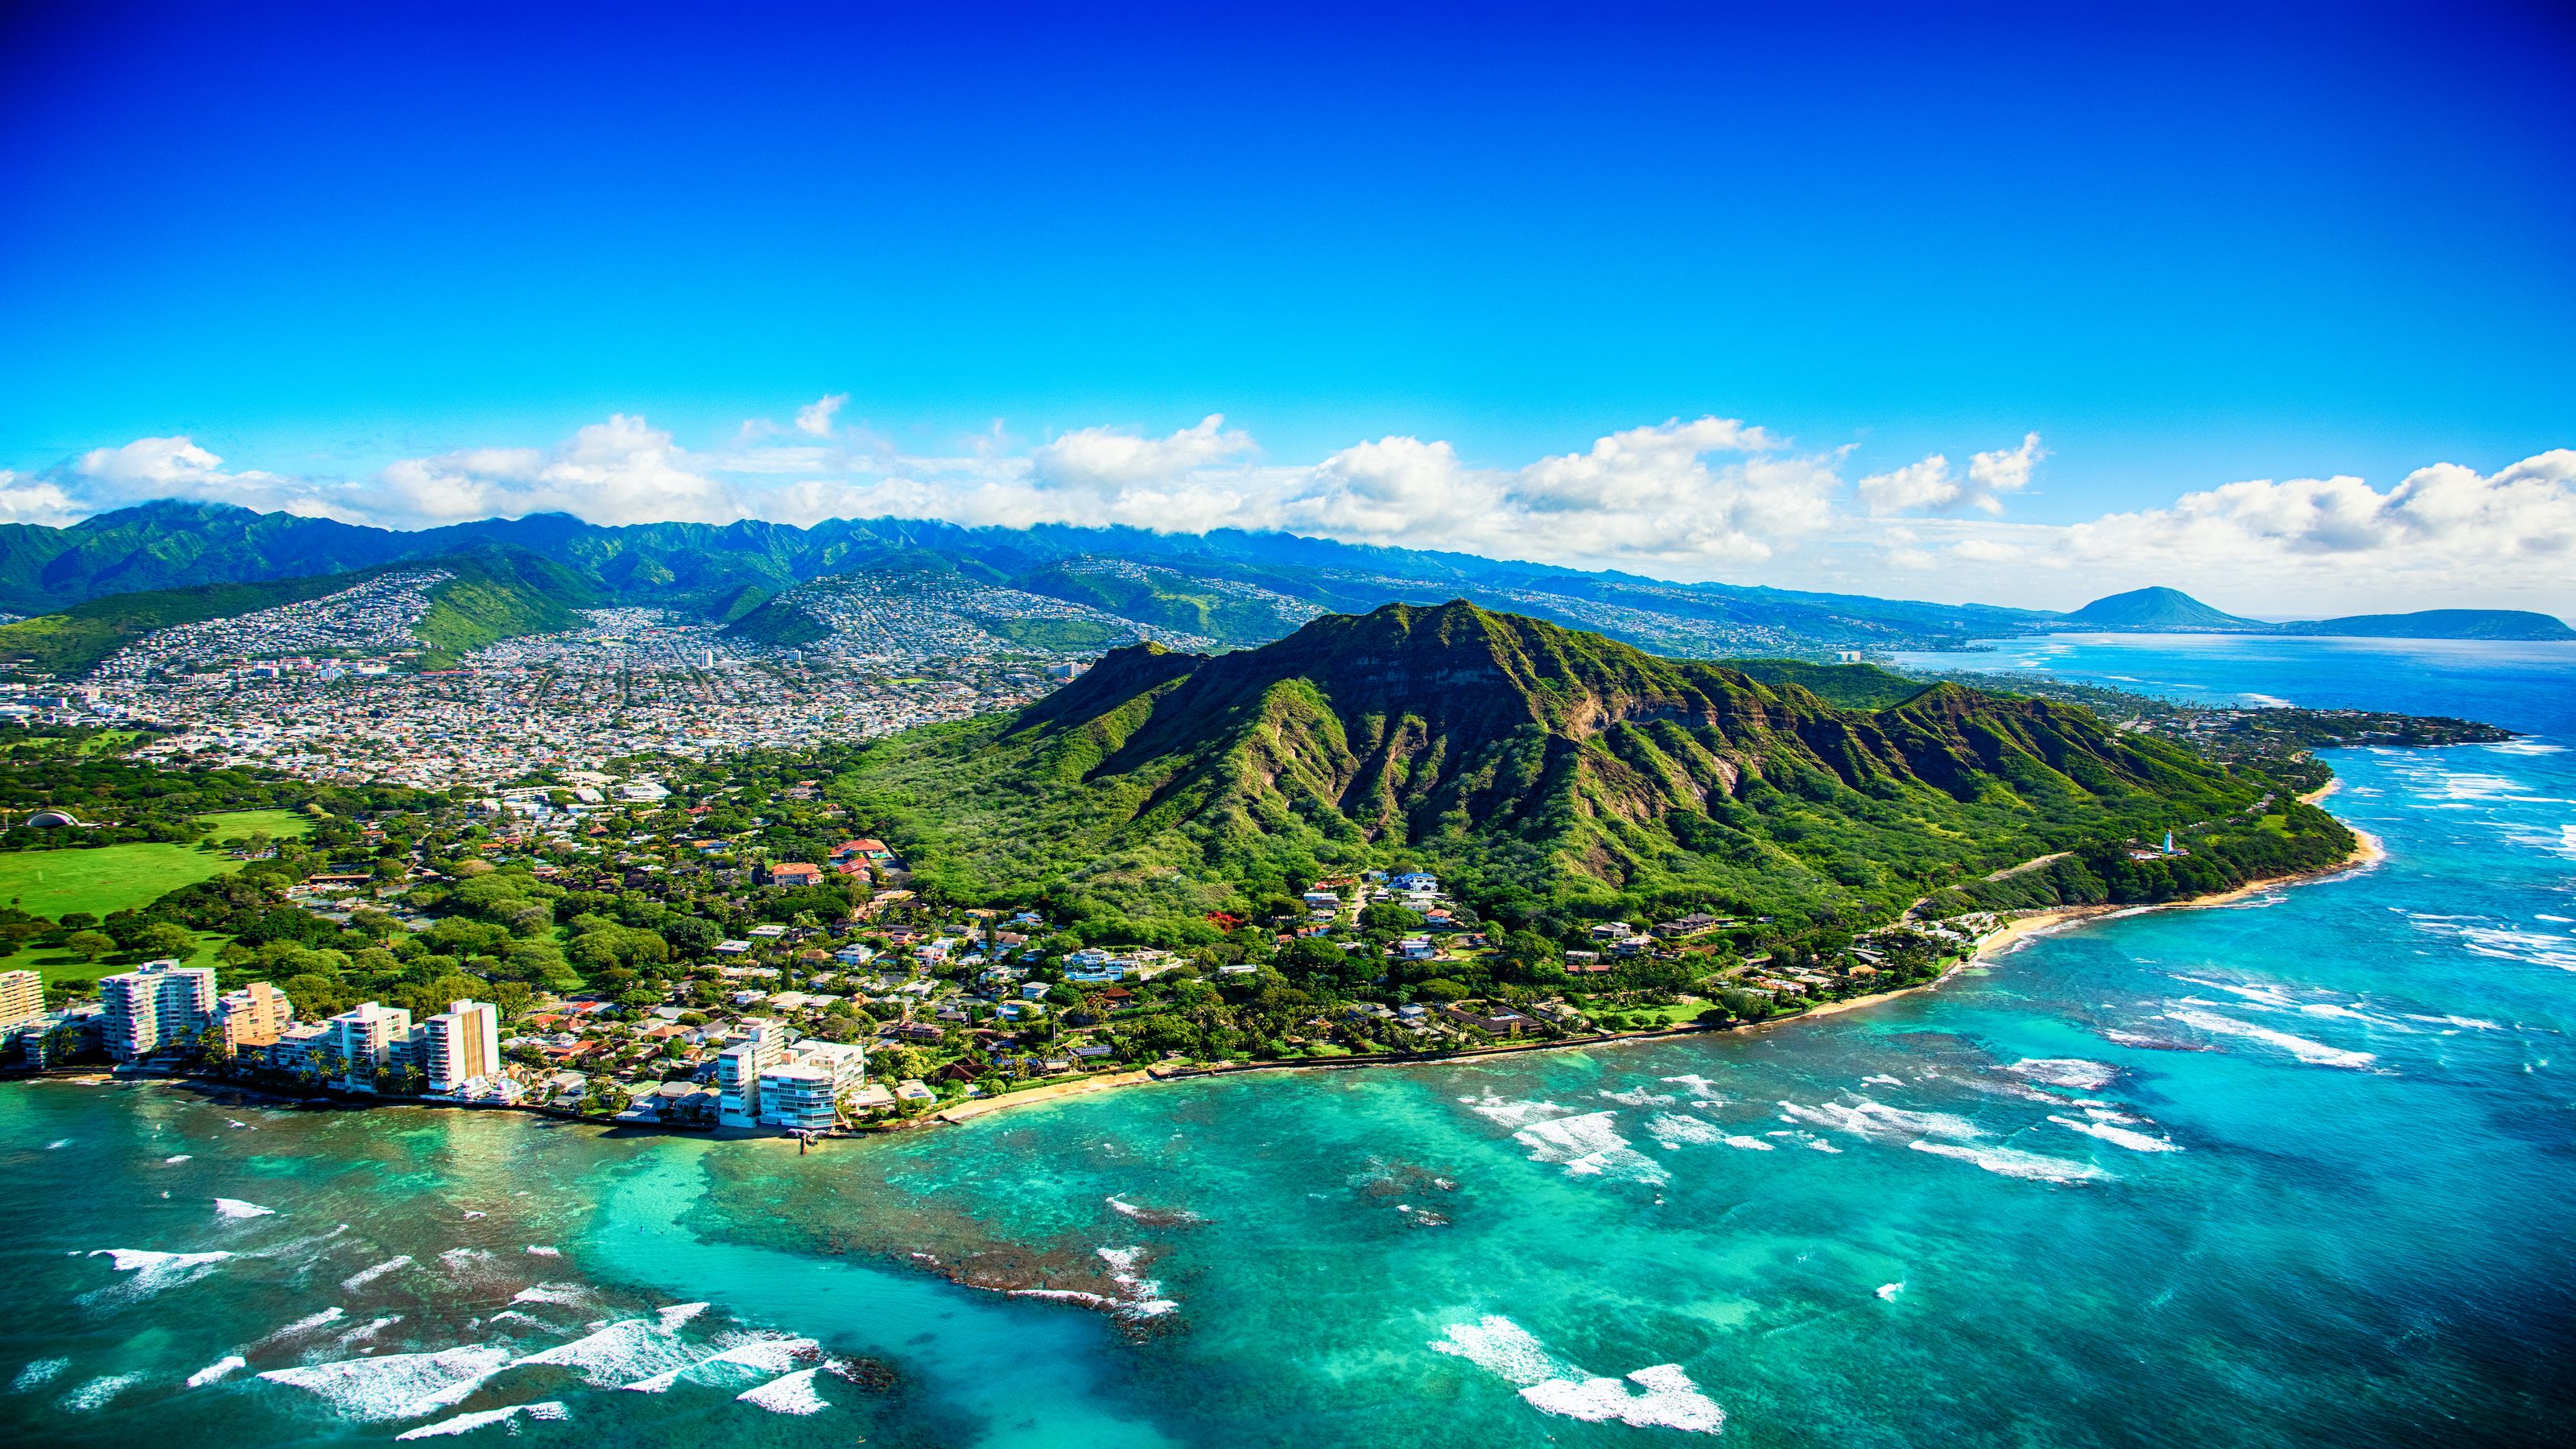 We found the best flight deals to Hawaii for less than $200 round trip